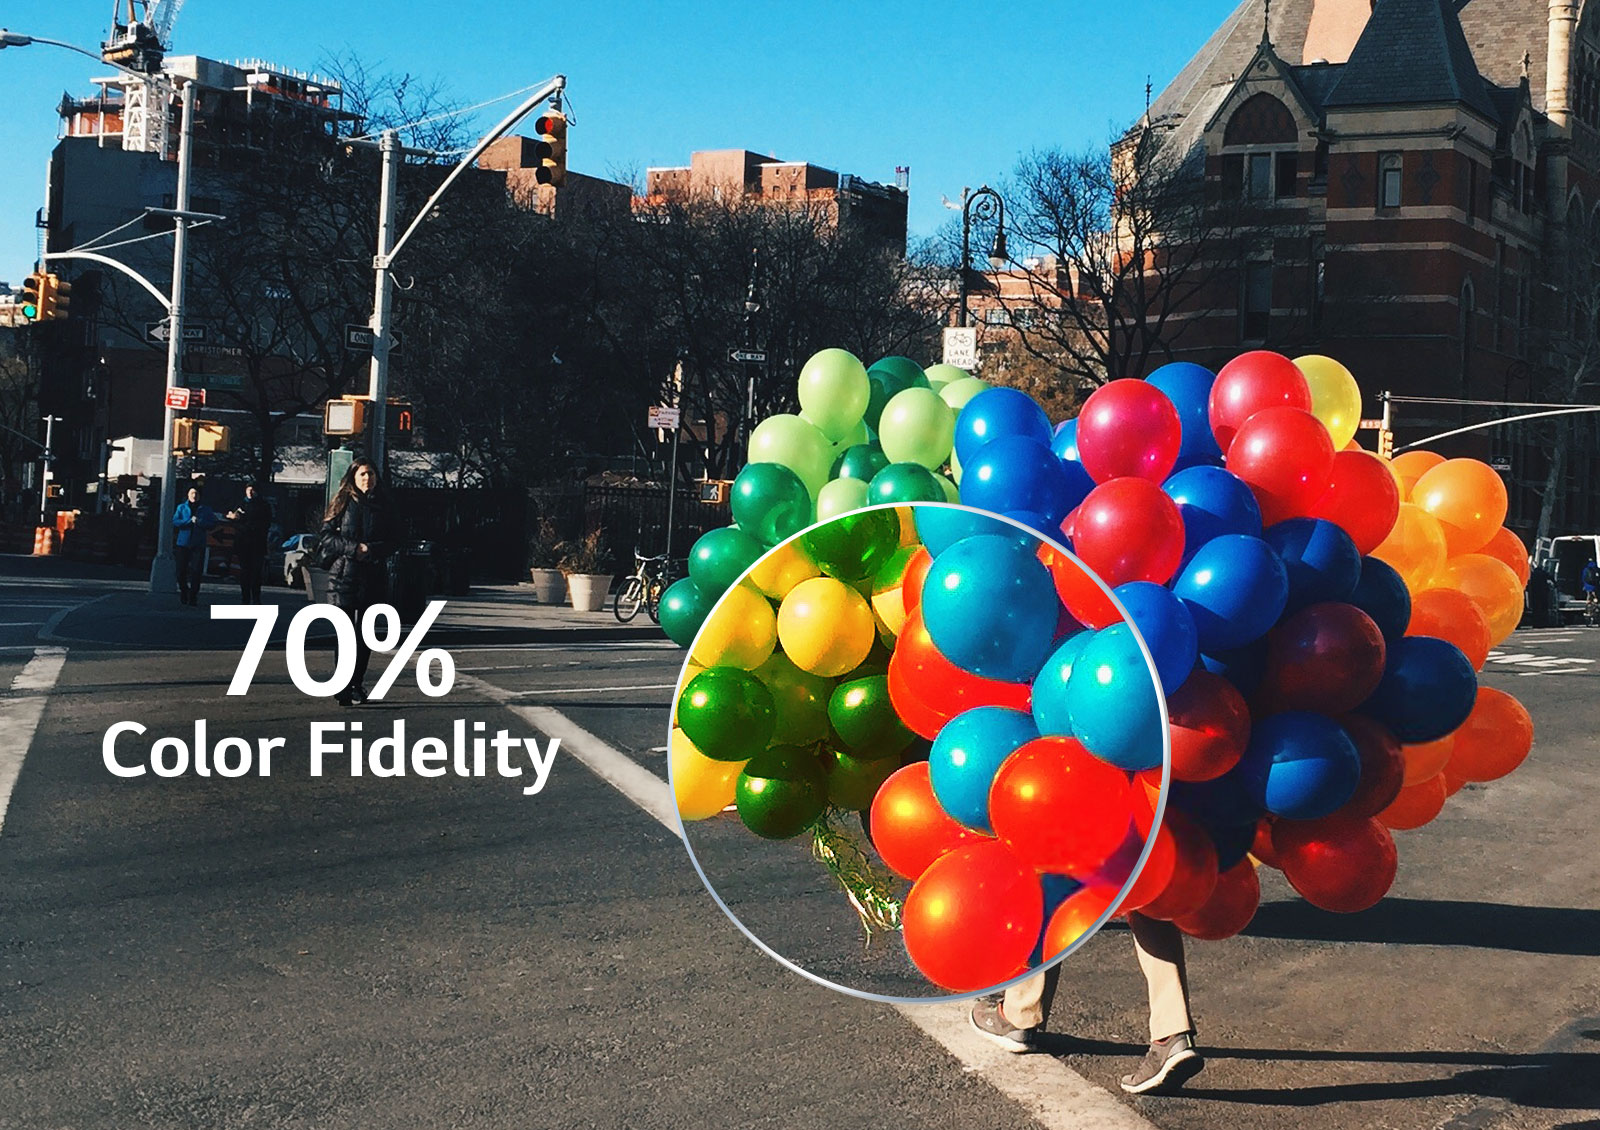 A part of a bunch of colorful balloons that a man is holding while crossing the crosswalk is enlarged to show the effect of color fidelity.